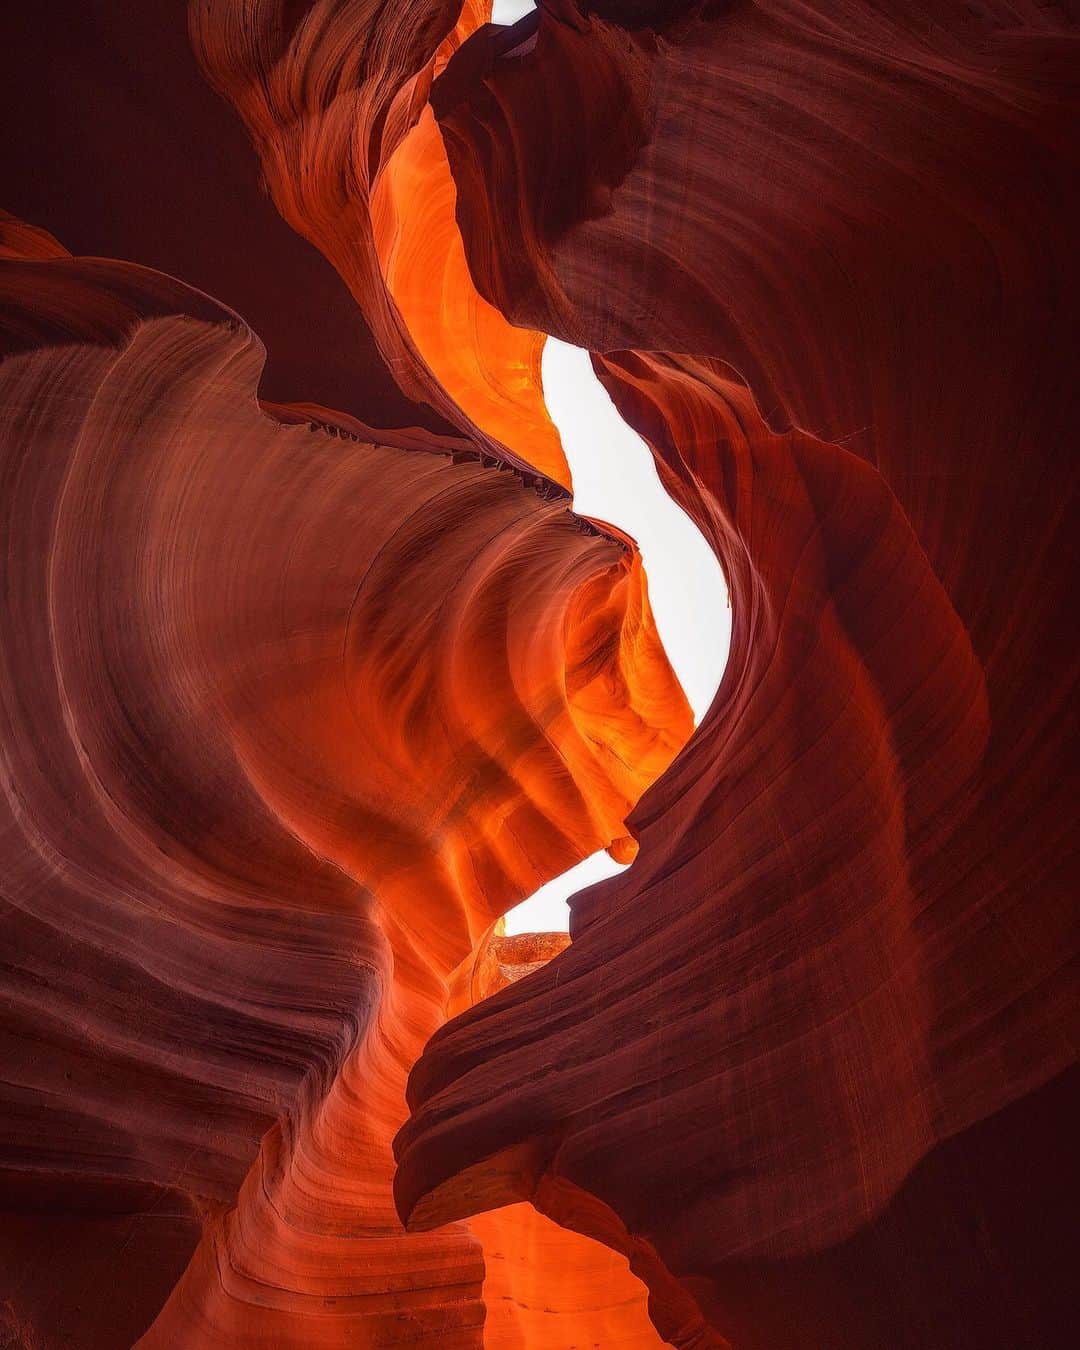 Chase Dekker Wild-Life Imagesのインスタグラム：「While I’m a little late in spreading the news, Upper Antelope Canyon in northern Arizona has stopped giving photography tours. While Lower Antelope Canyon had taken this stance a few years back, it was still possible to bring a tripod into Upper Antelope to get the classic shots that millions have taken before. While one can still bring a camera with them, capturing the dynamic range of light and color will be immensely difficult without a tripod and some time to breathe and think. This shot here was actually taken in Lower where I had to hold myself as steady as possible and take multiple exposures and realign and blend them later. I have mixed feelings about the end of the photography tours as I had a blast during my visit, but understand how the overcrowding is becoming a bigger issue. What do you think?」